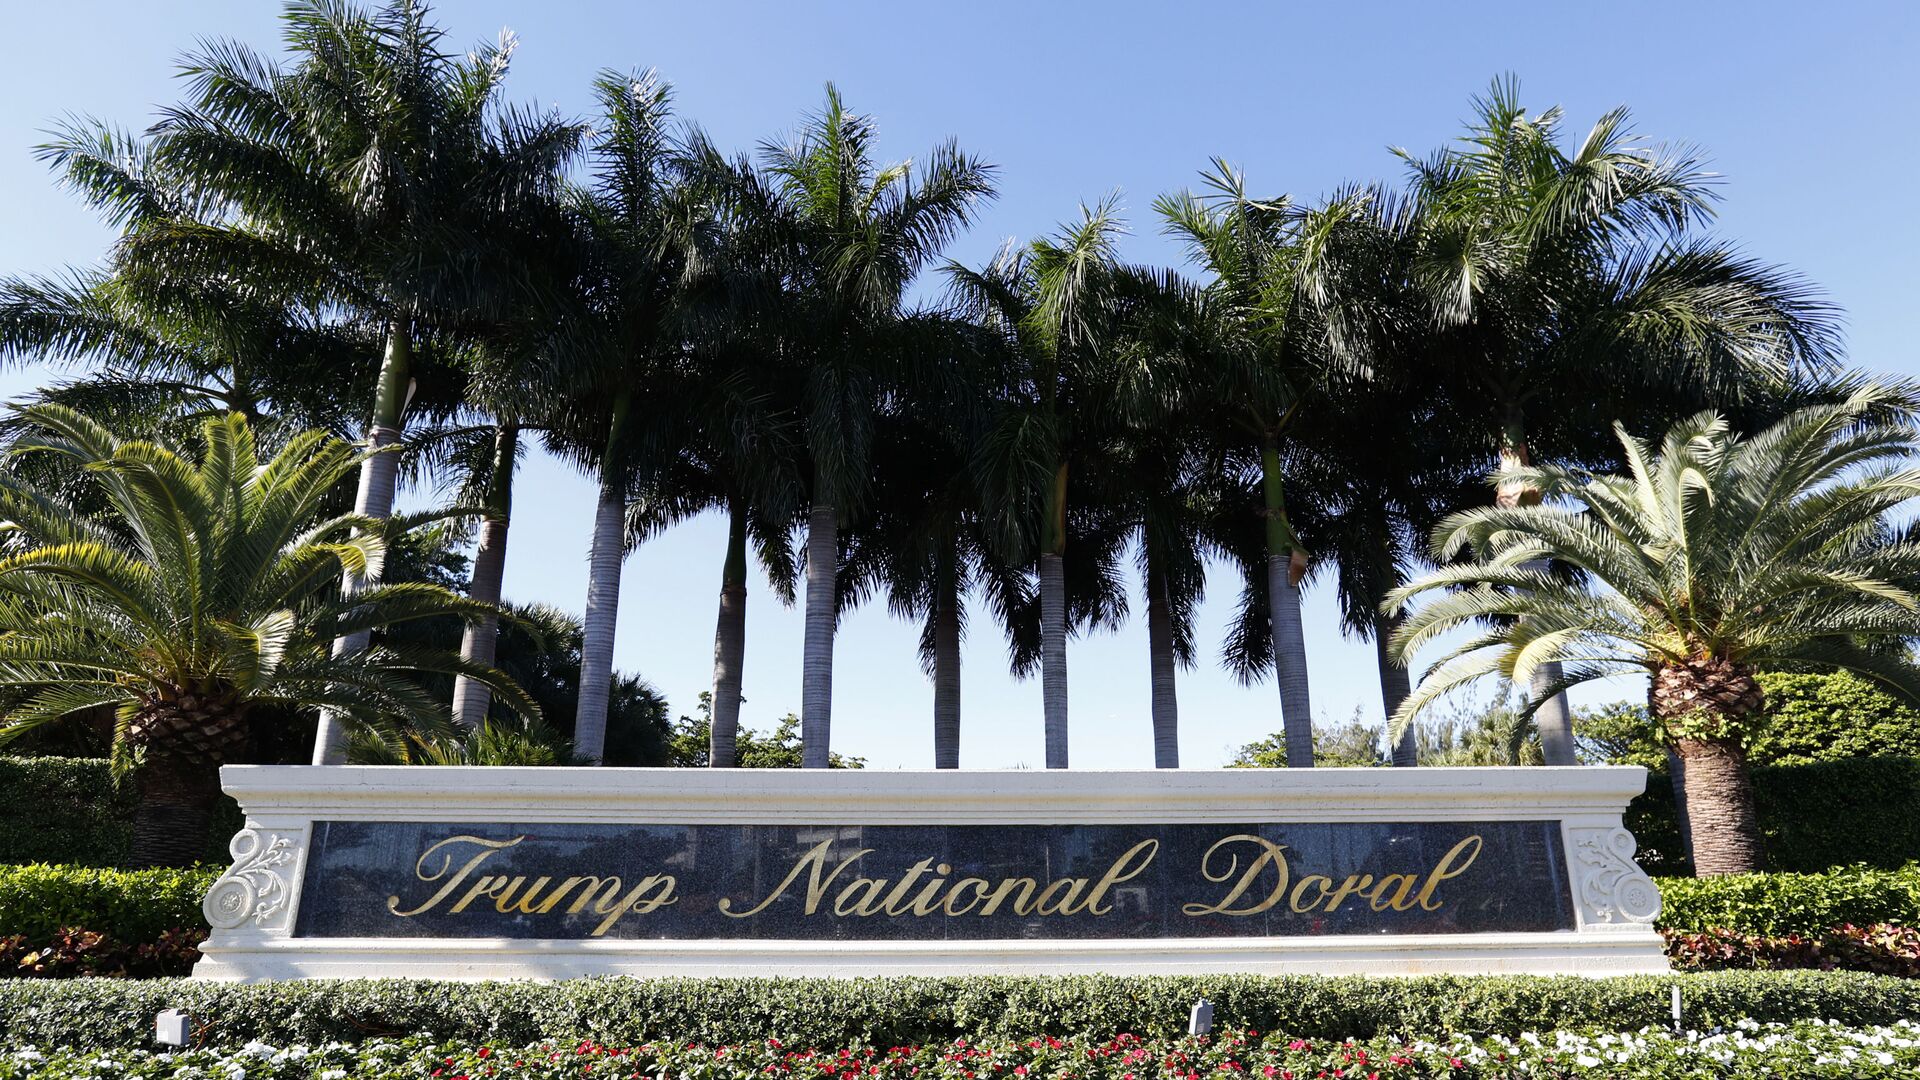 FILE - In this Nov. 20, 2019, file photo, palm trees line the entrance to Trump National Doral resort in Doral, Fla. Some furloughs at the Trump golf resort in South Florida are becoming permanent layoffs. A notice that the Trump National Doral Miami filed with the State of Florida last week says it is permanently laying off 250 workers out of 560 employees who were furloughed in March. The positions include cooks, housekeepers, servers, engineers, golf concierges and service attendants. - Sputnik International, 1920, 19.02.2022